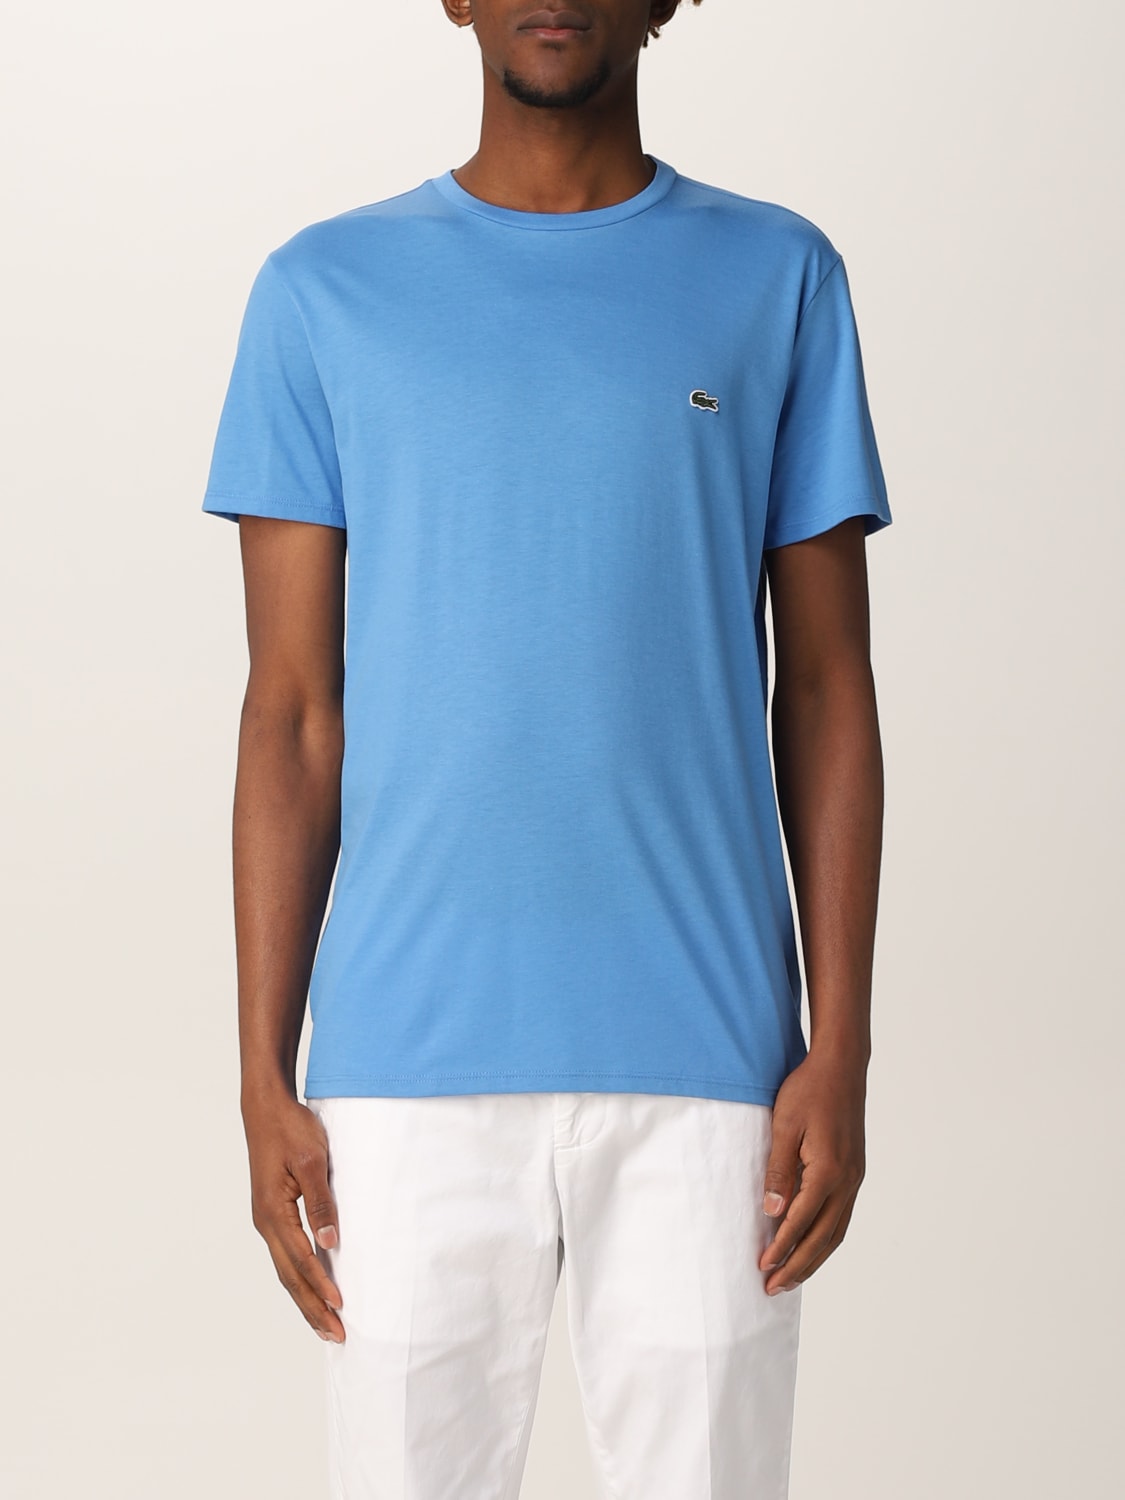 Lacoste Outlet: t-shirt for man - Gnawed Blue Lacoste t-shirt TH6709 online on GIGLIO.COM